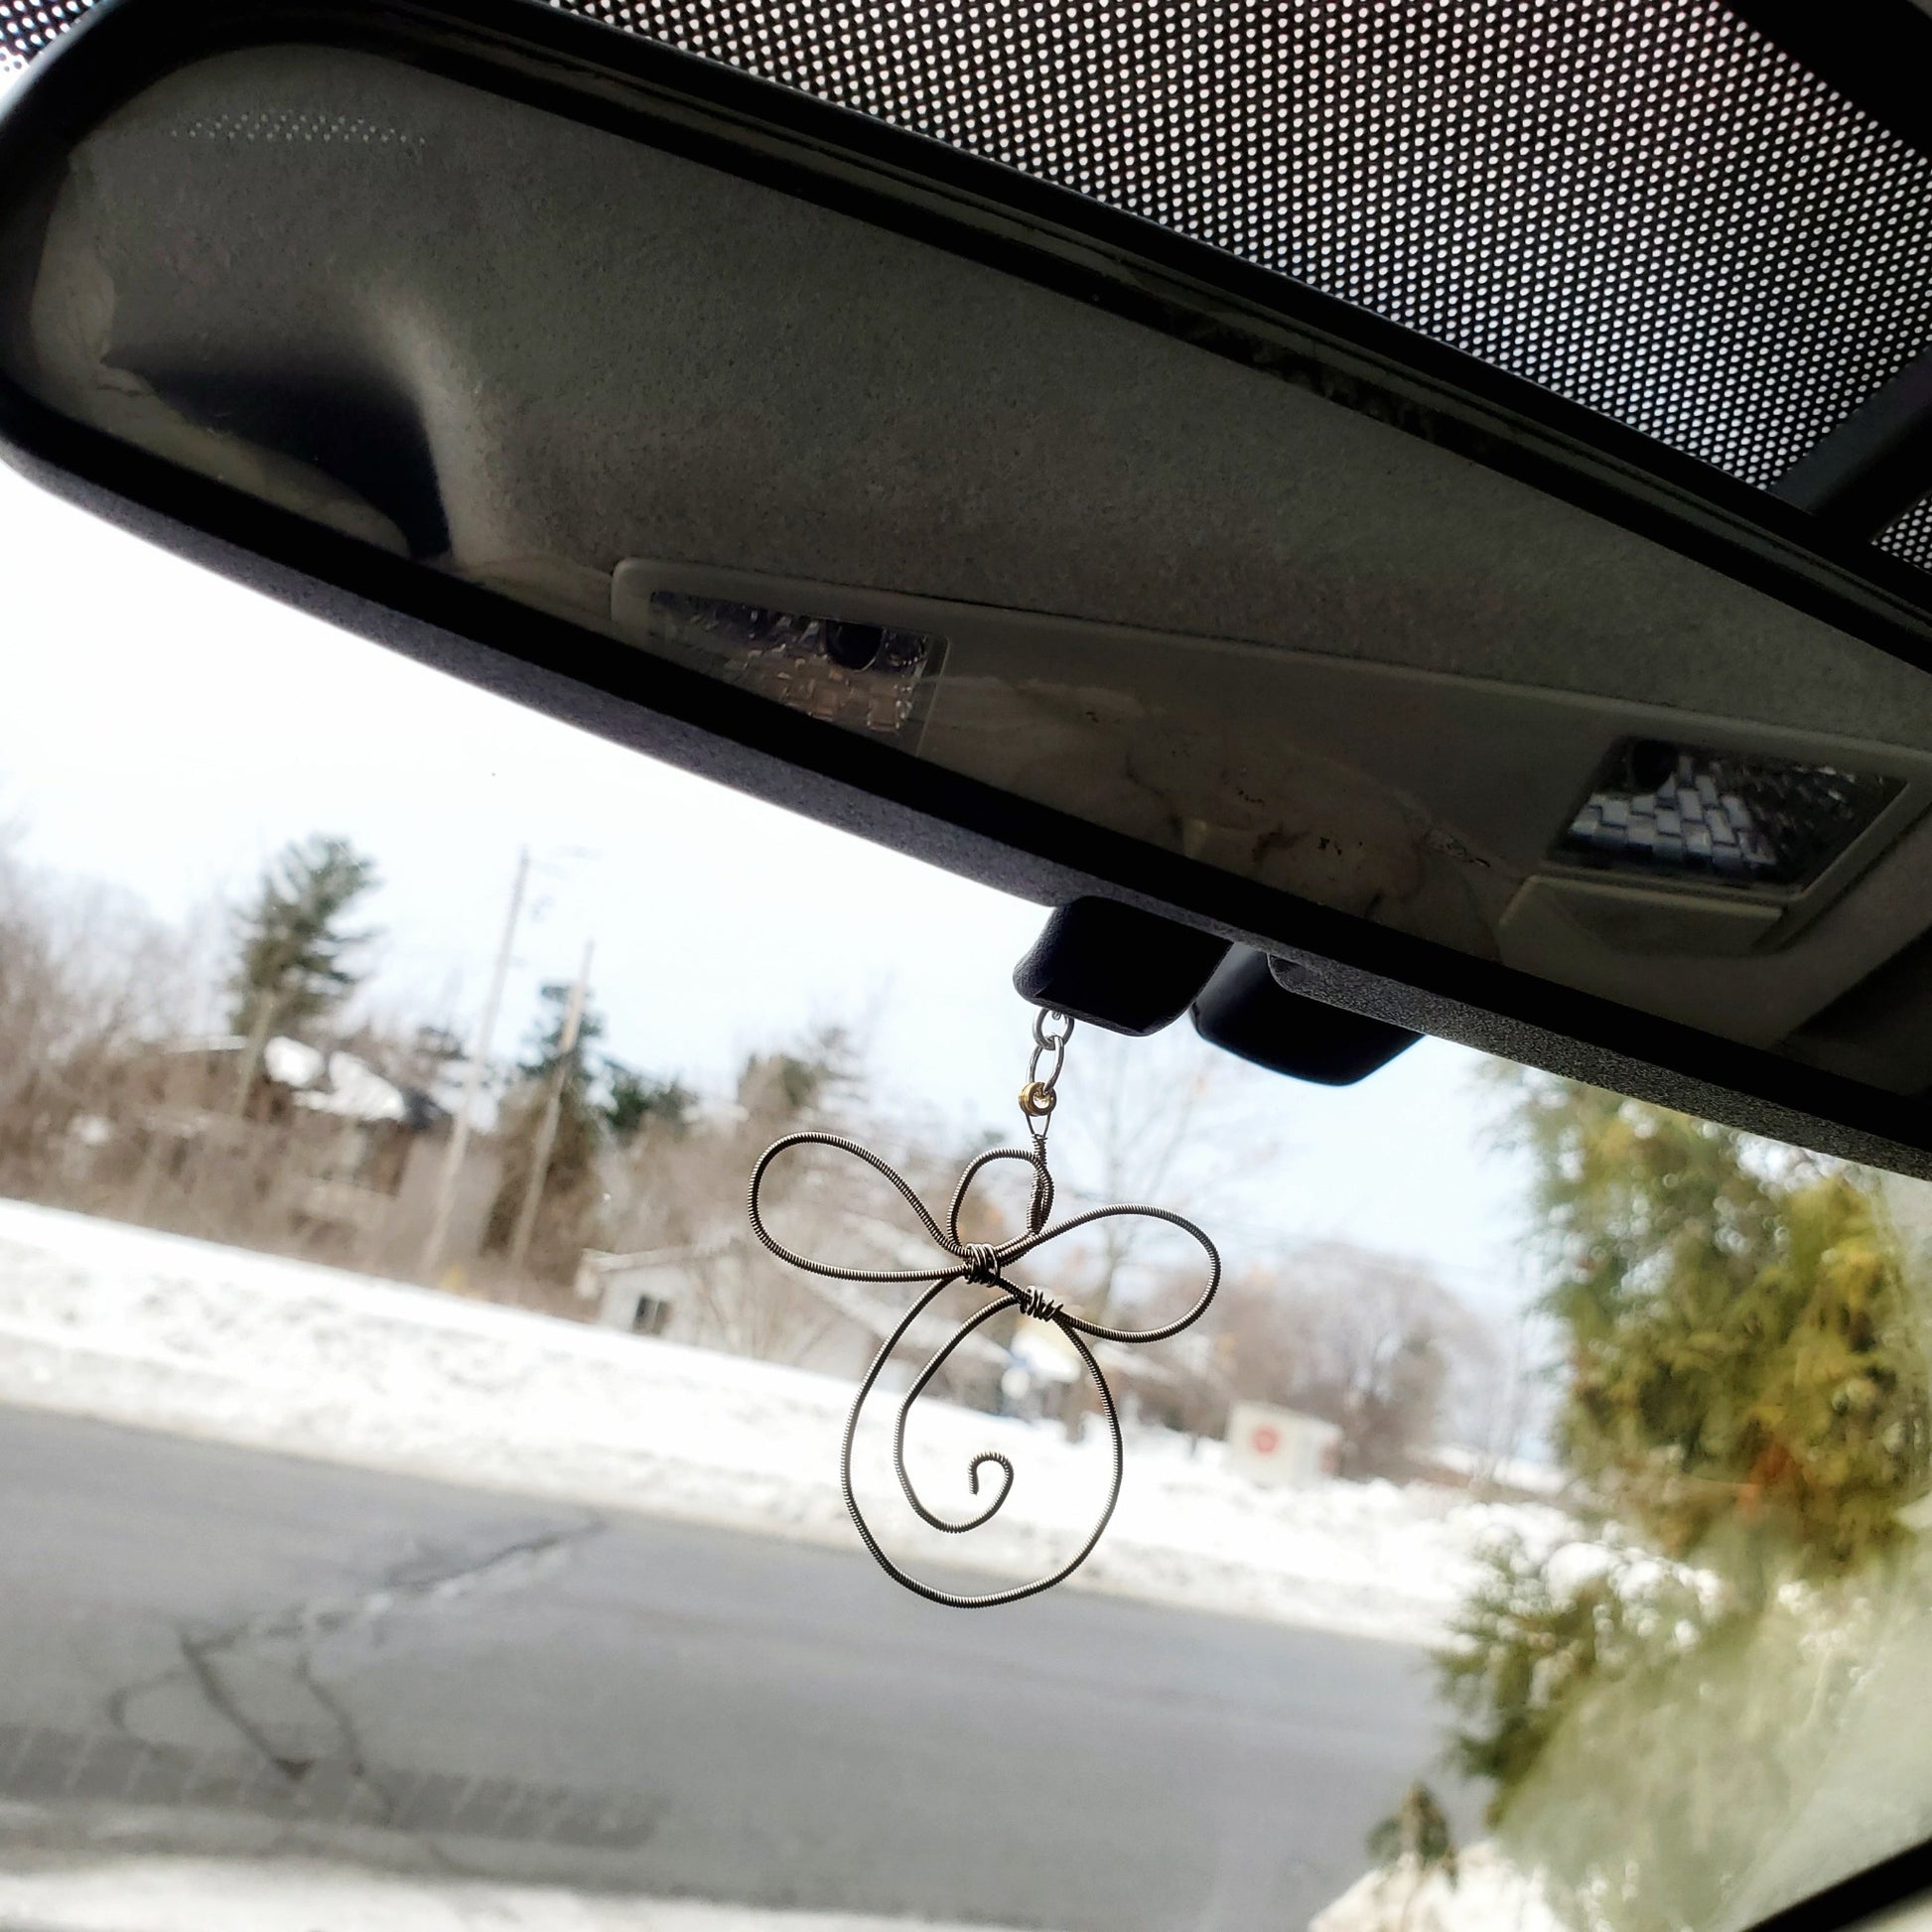 rearview mirror  under which is a decoration shaped like an angel made from an upcycled guitar string